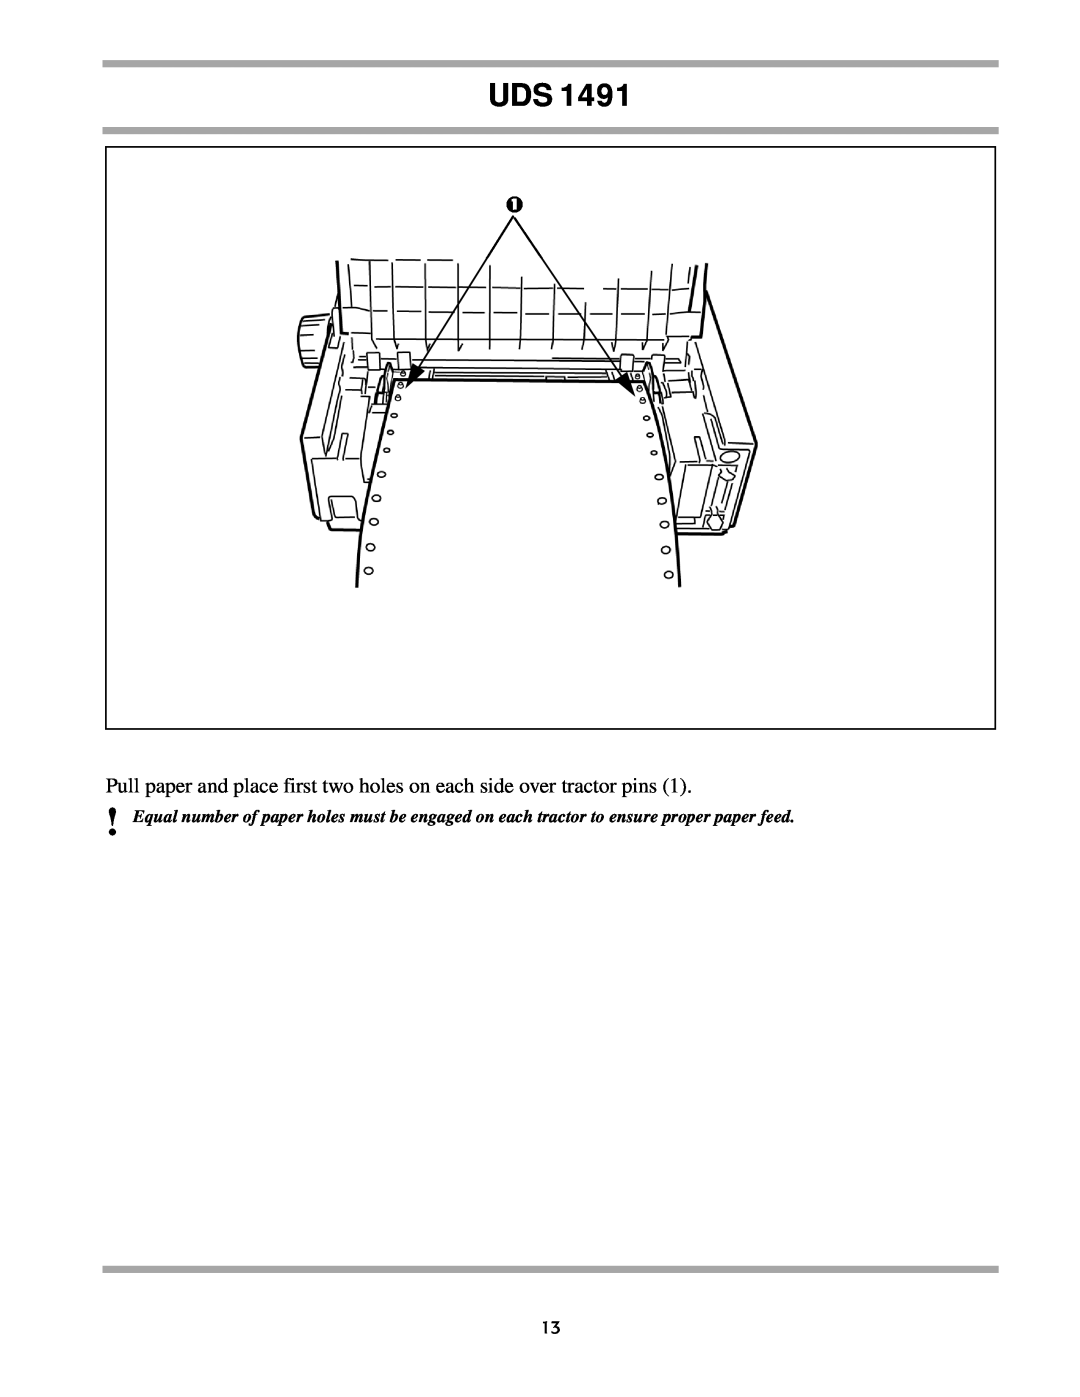 Unisys UDS 1491 setup guide Pull paper and place first two holes on each side over tractor pins 